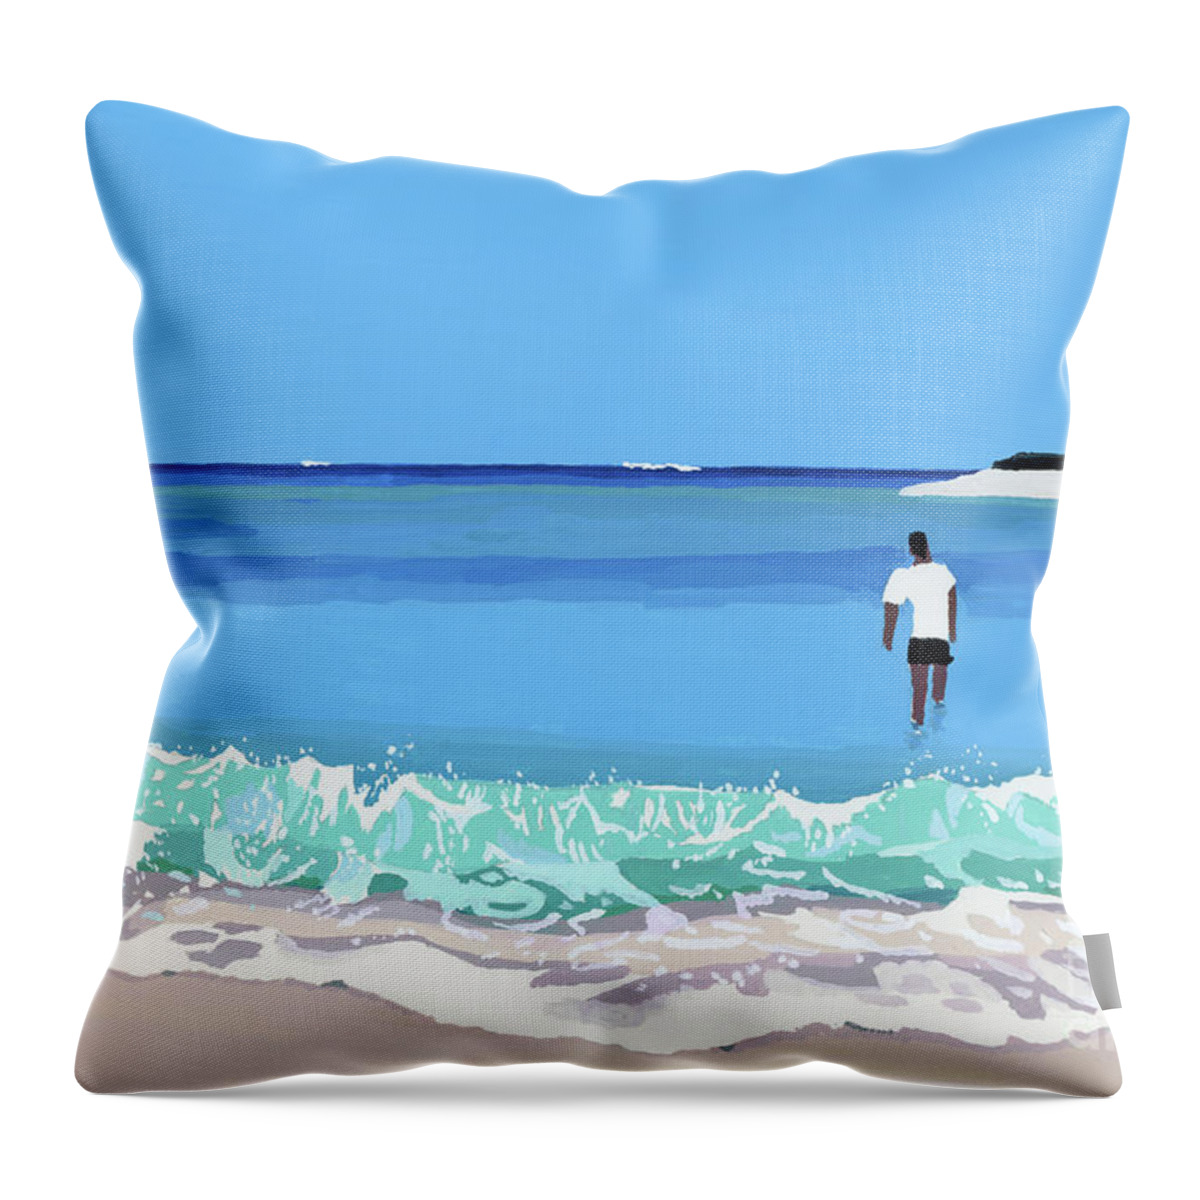 Sea And Man Throw Pillow featuring the painting Sea And Man by Hiroyuki Izutsu